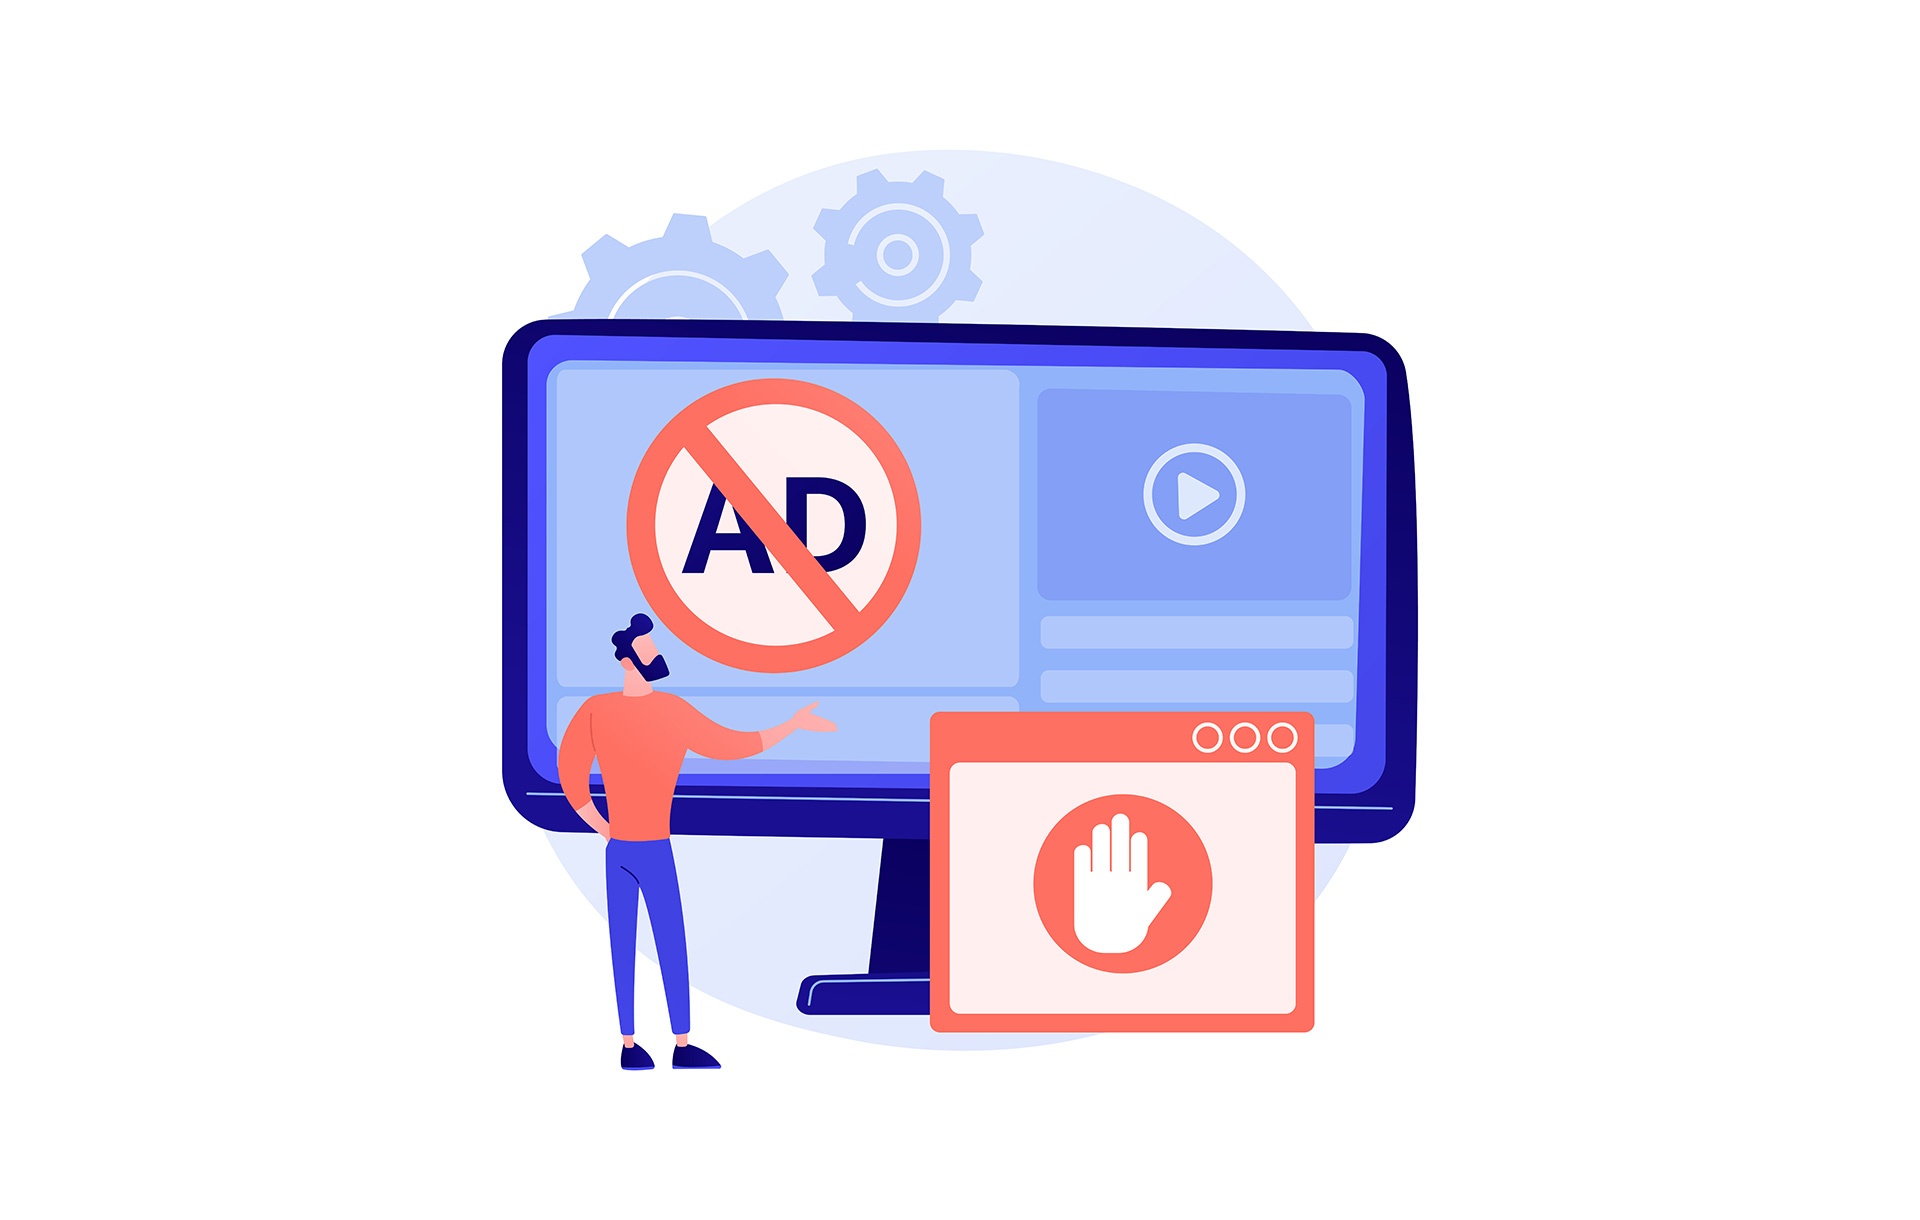 Solutions to ad-blocking Easy, UX and GOOD content